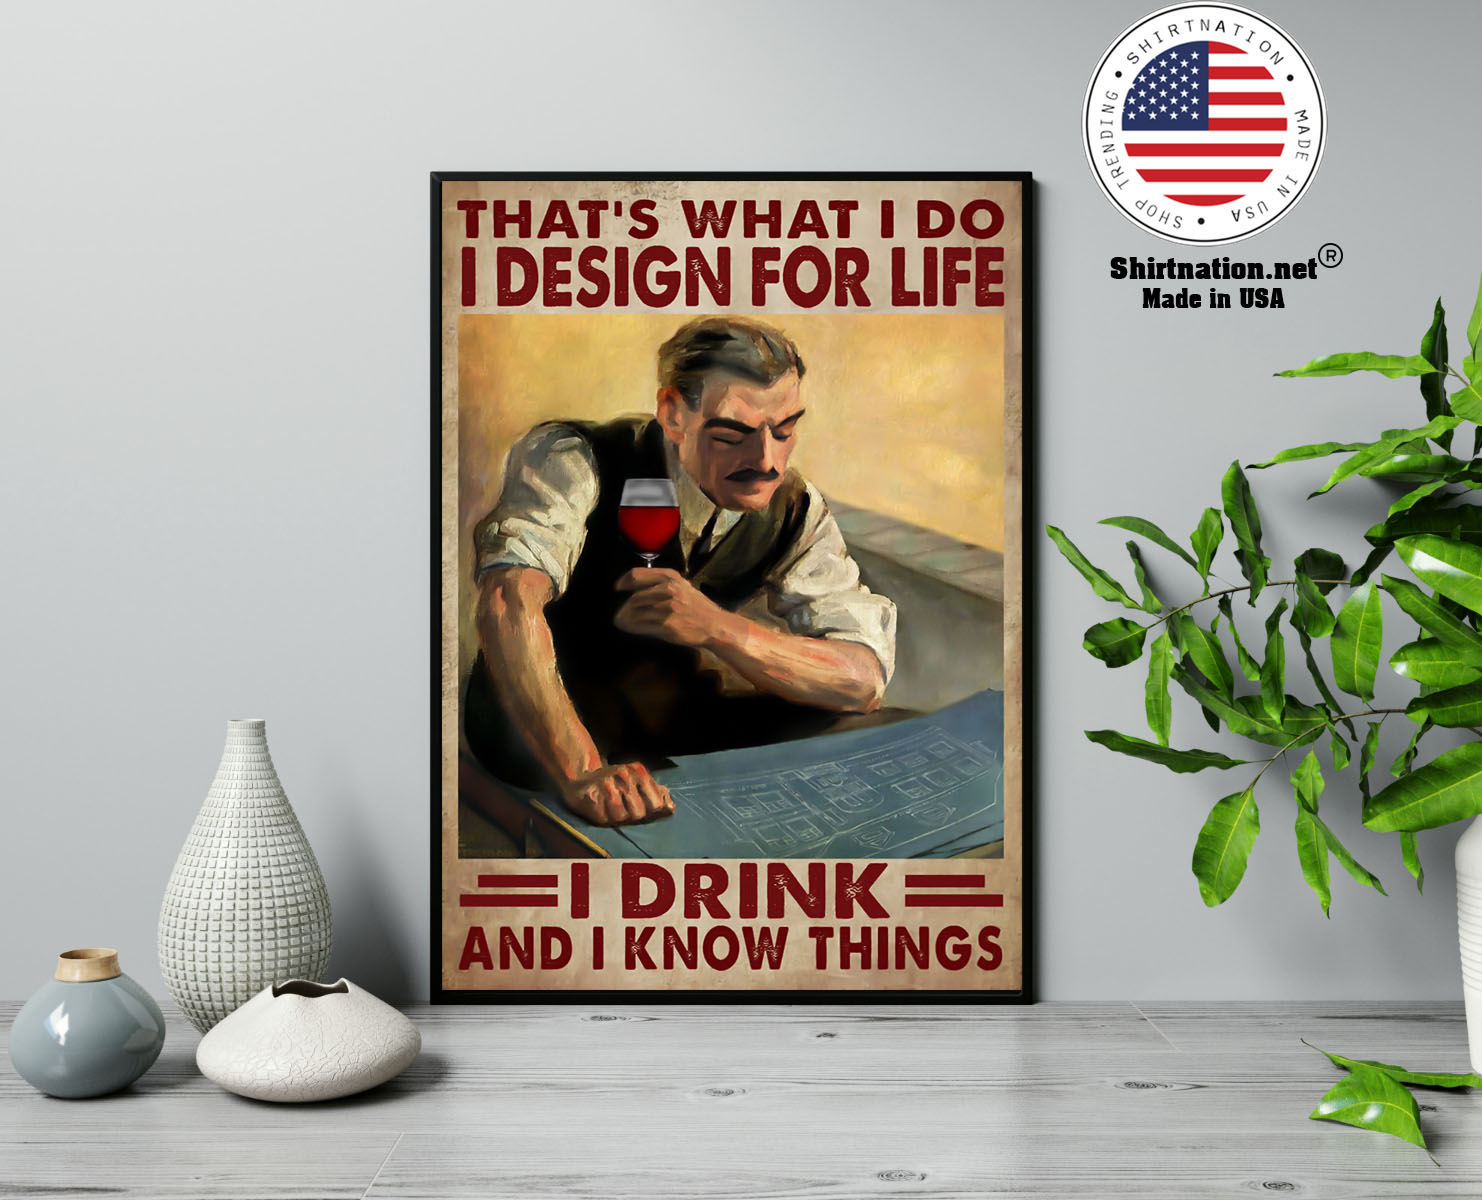 Thats what I do I design for life I drink and I know things poster 13